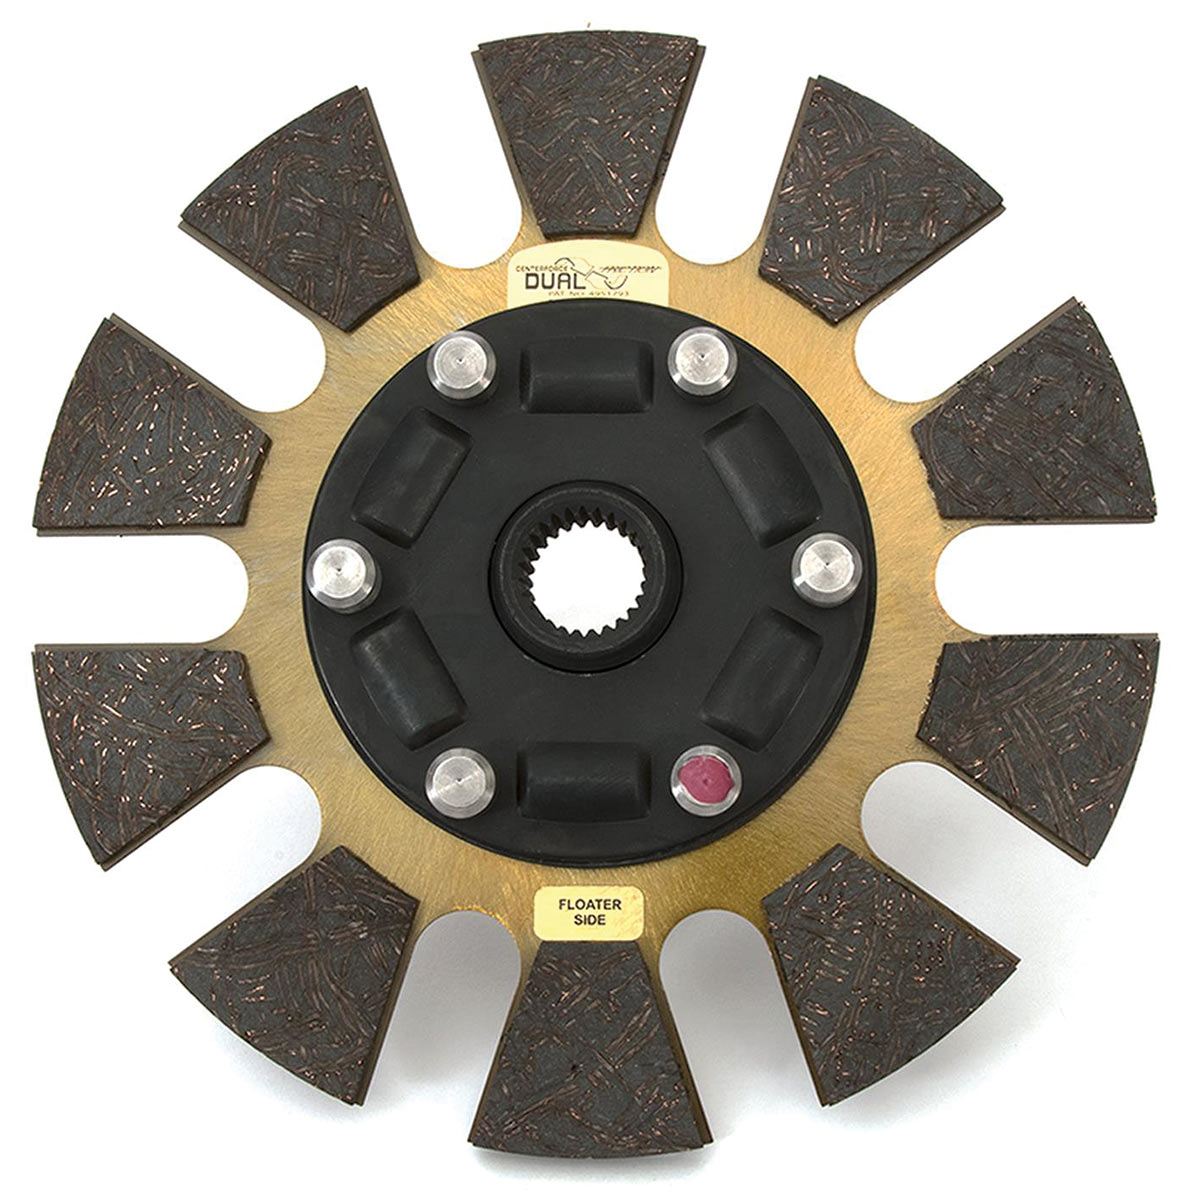 This image of one of the two discs from the Centerforce DYAD system reveals how the company reduces clutch disc weight by using a serrated face with 10 separate pucks. This trims the mass around the outside of the disc, reducing overall force at any given engine speed.